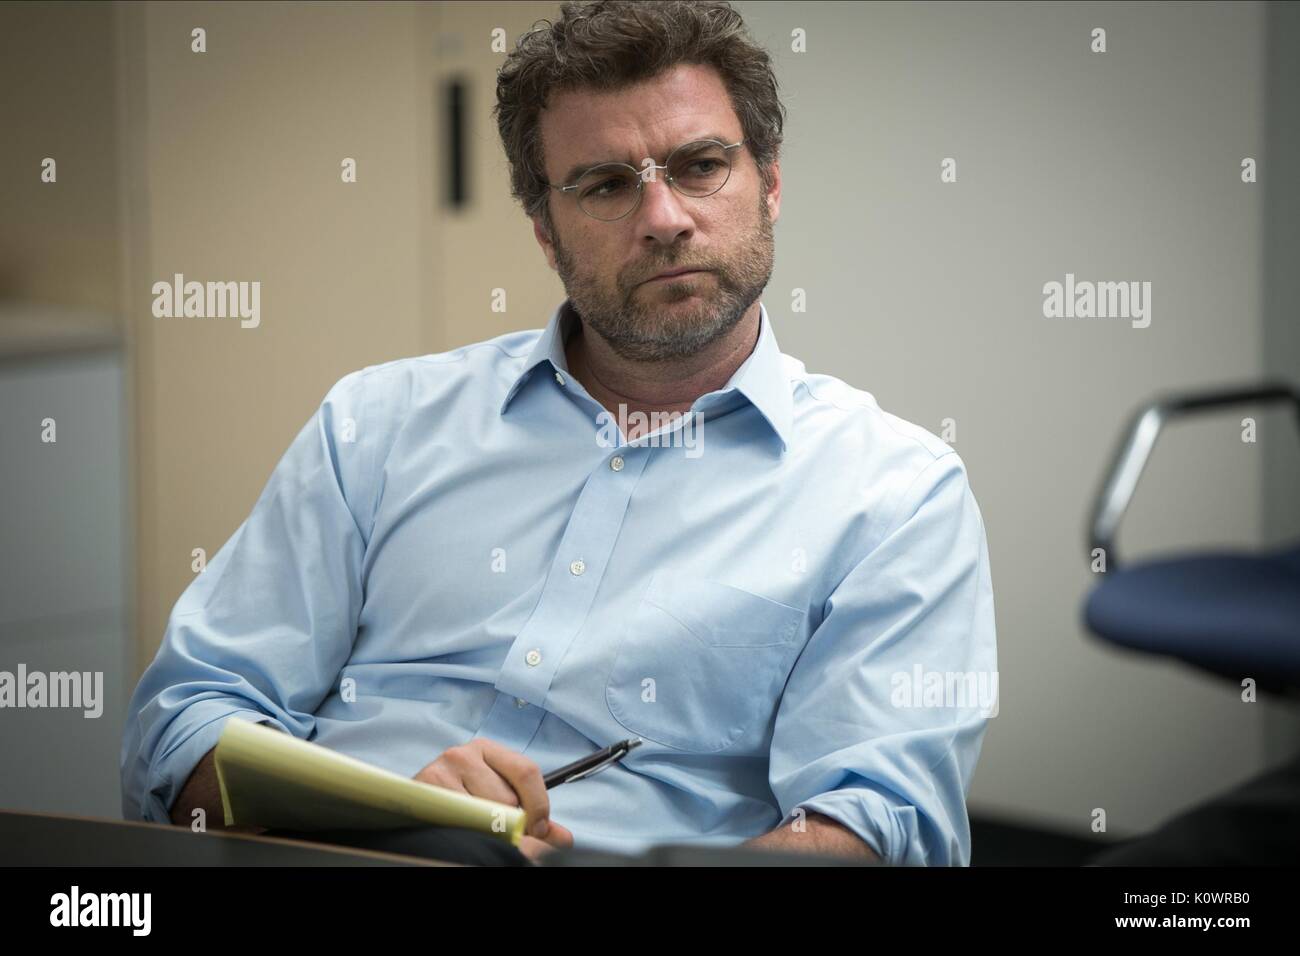 Liev Schreiber Spotlight High Resolution Stock Photography and Images -  Alamy